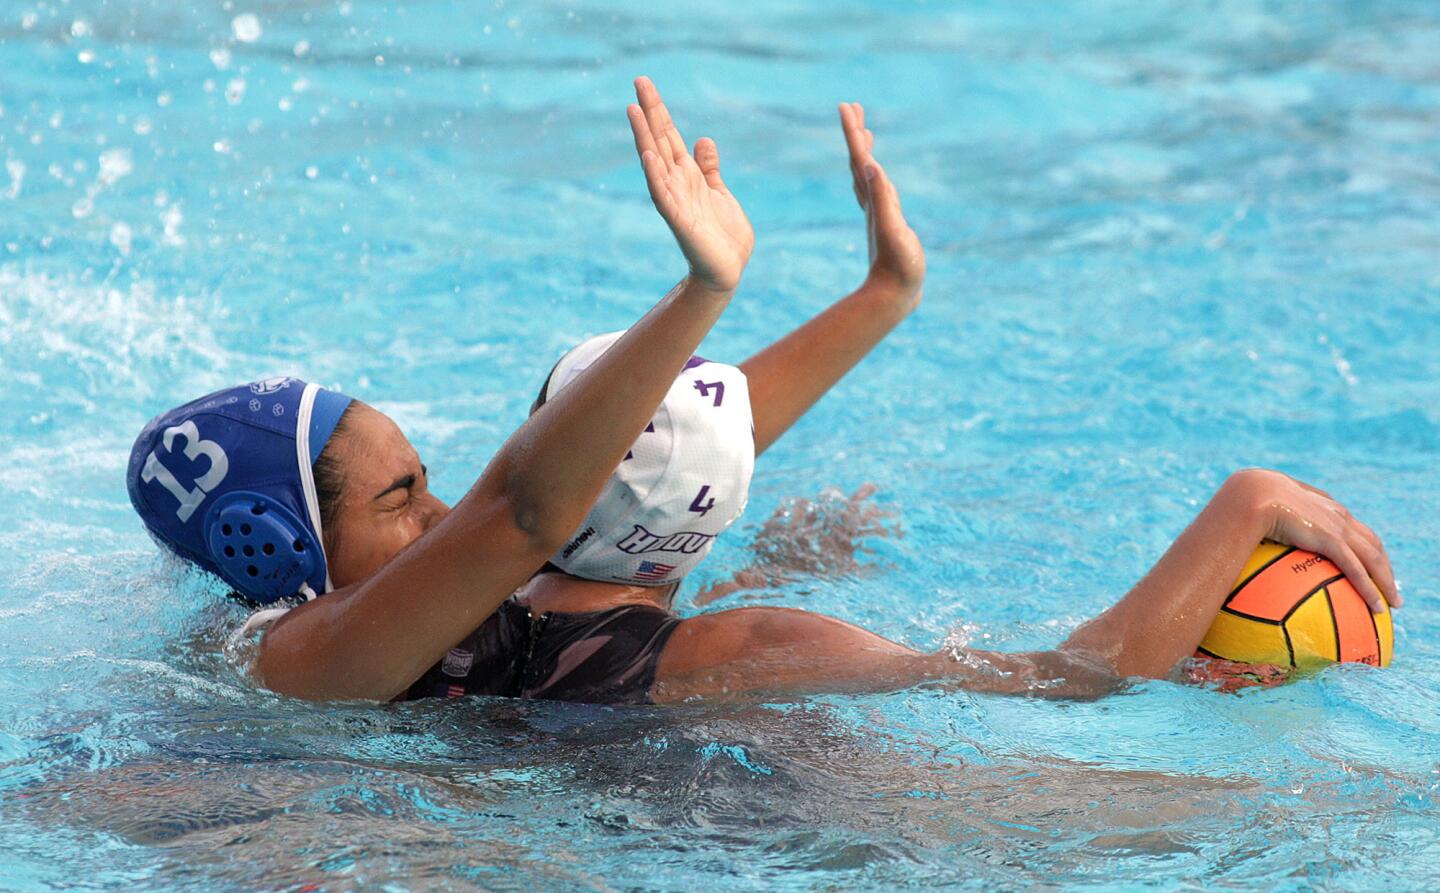 Burbank water polo Hoover Pacific girls League Gallery: Photo vs.